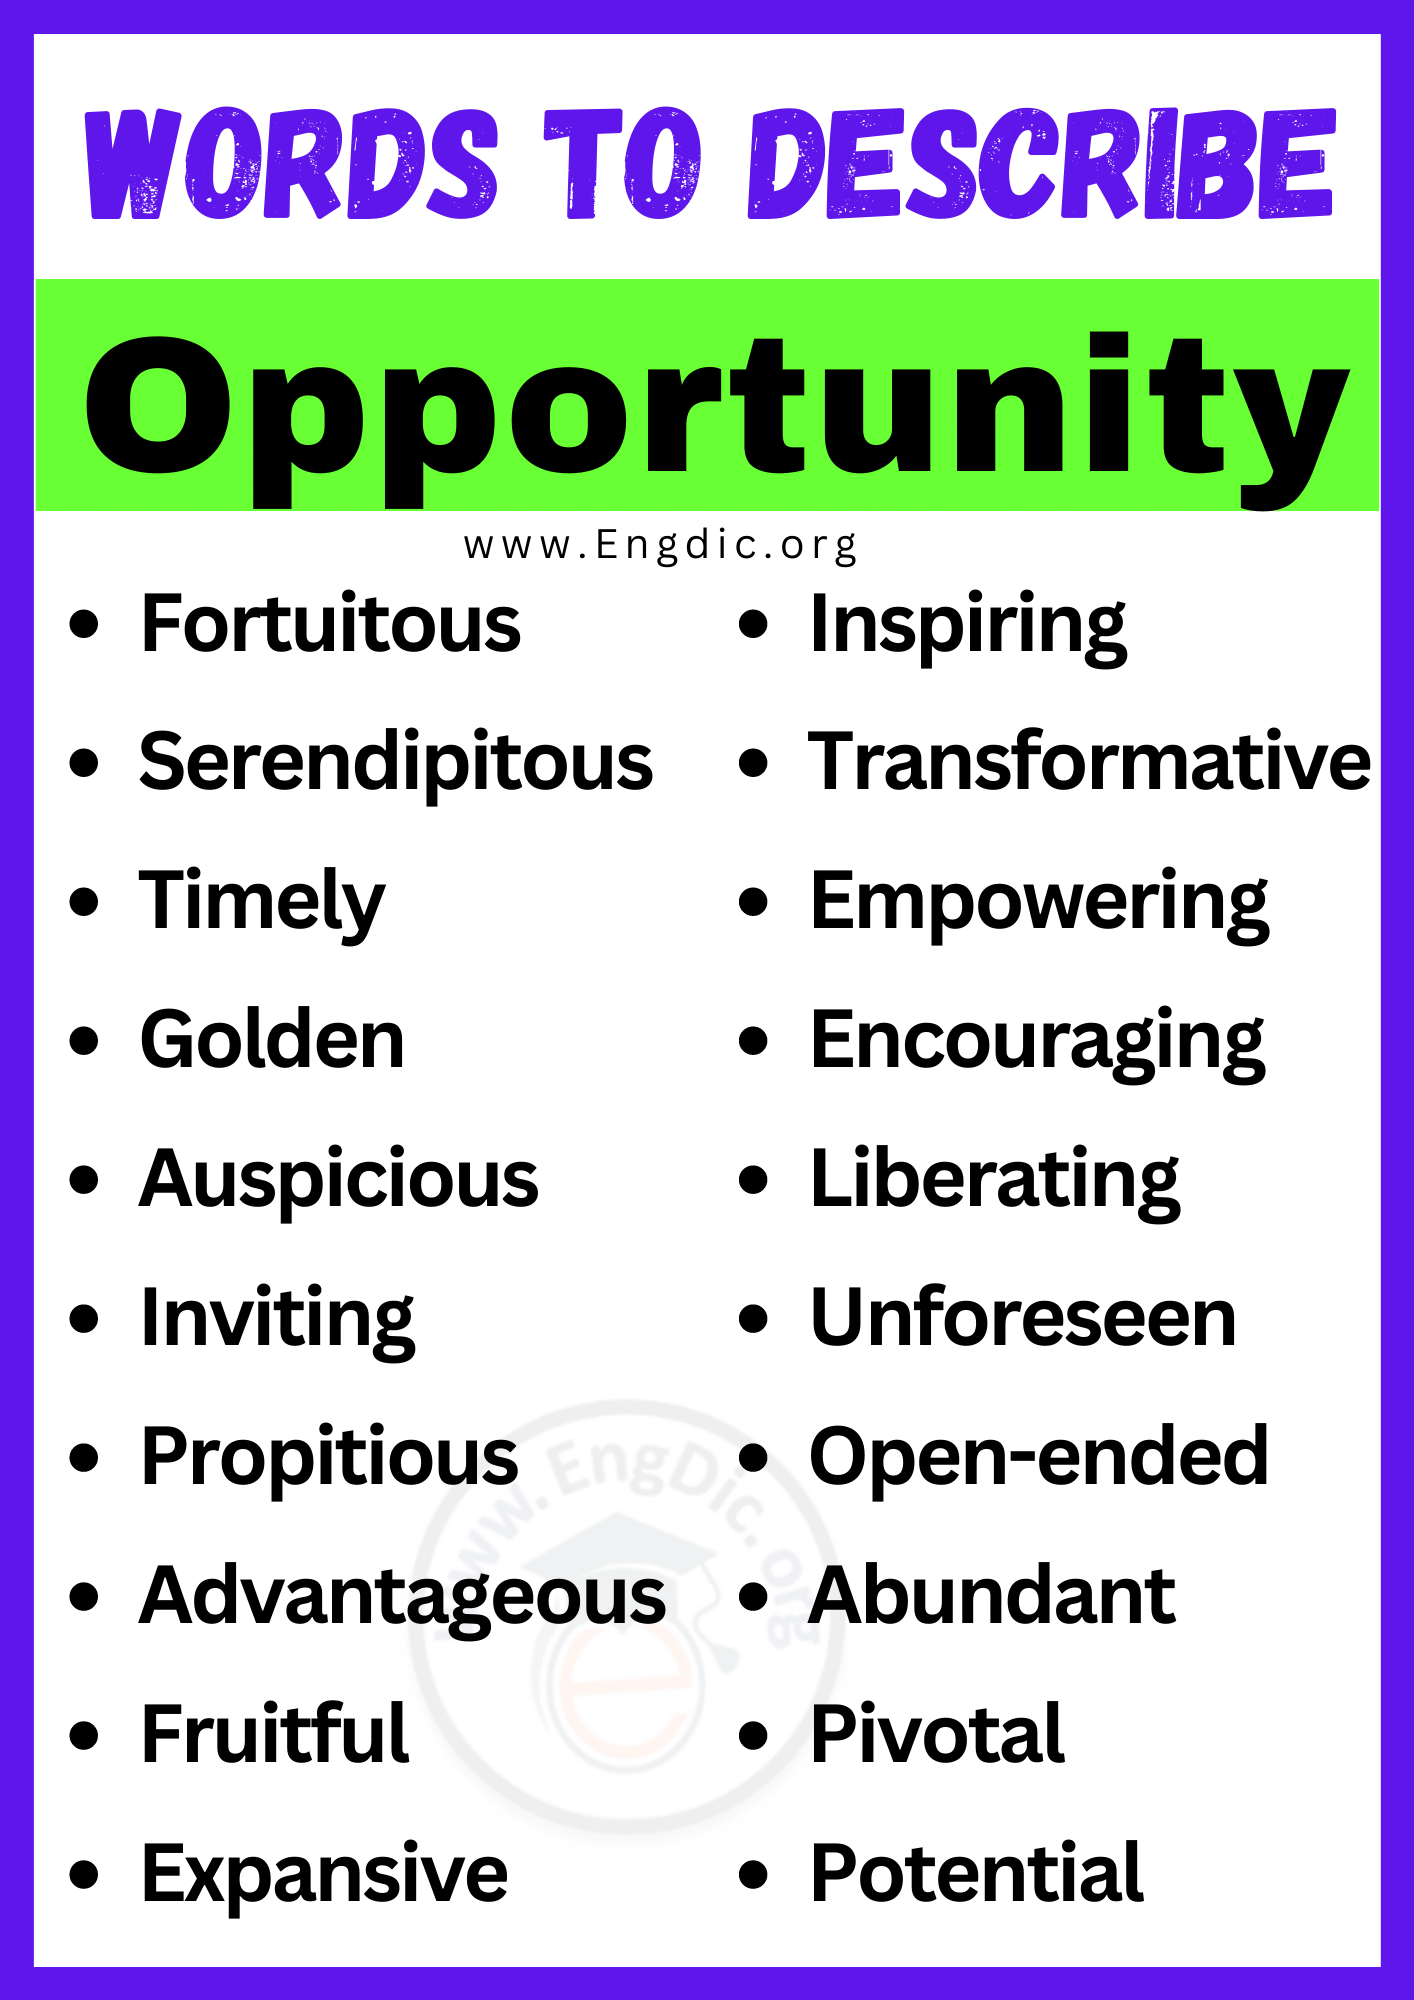 Words to Describe Opportunity